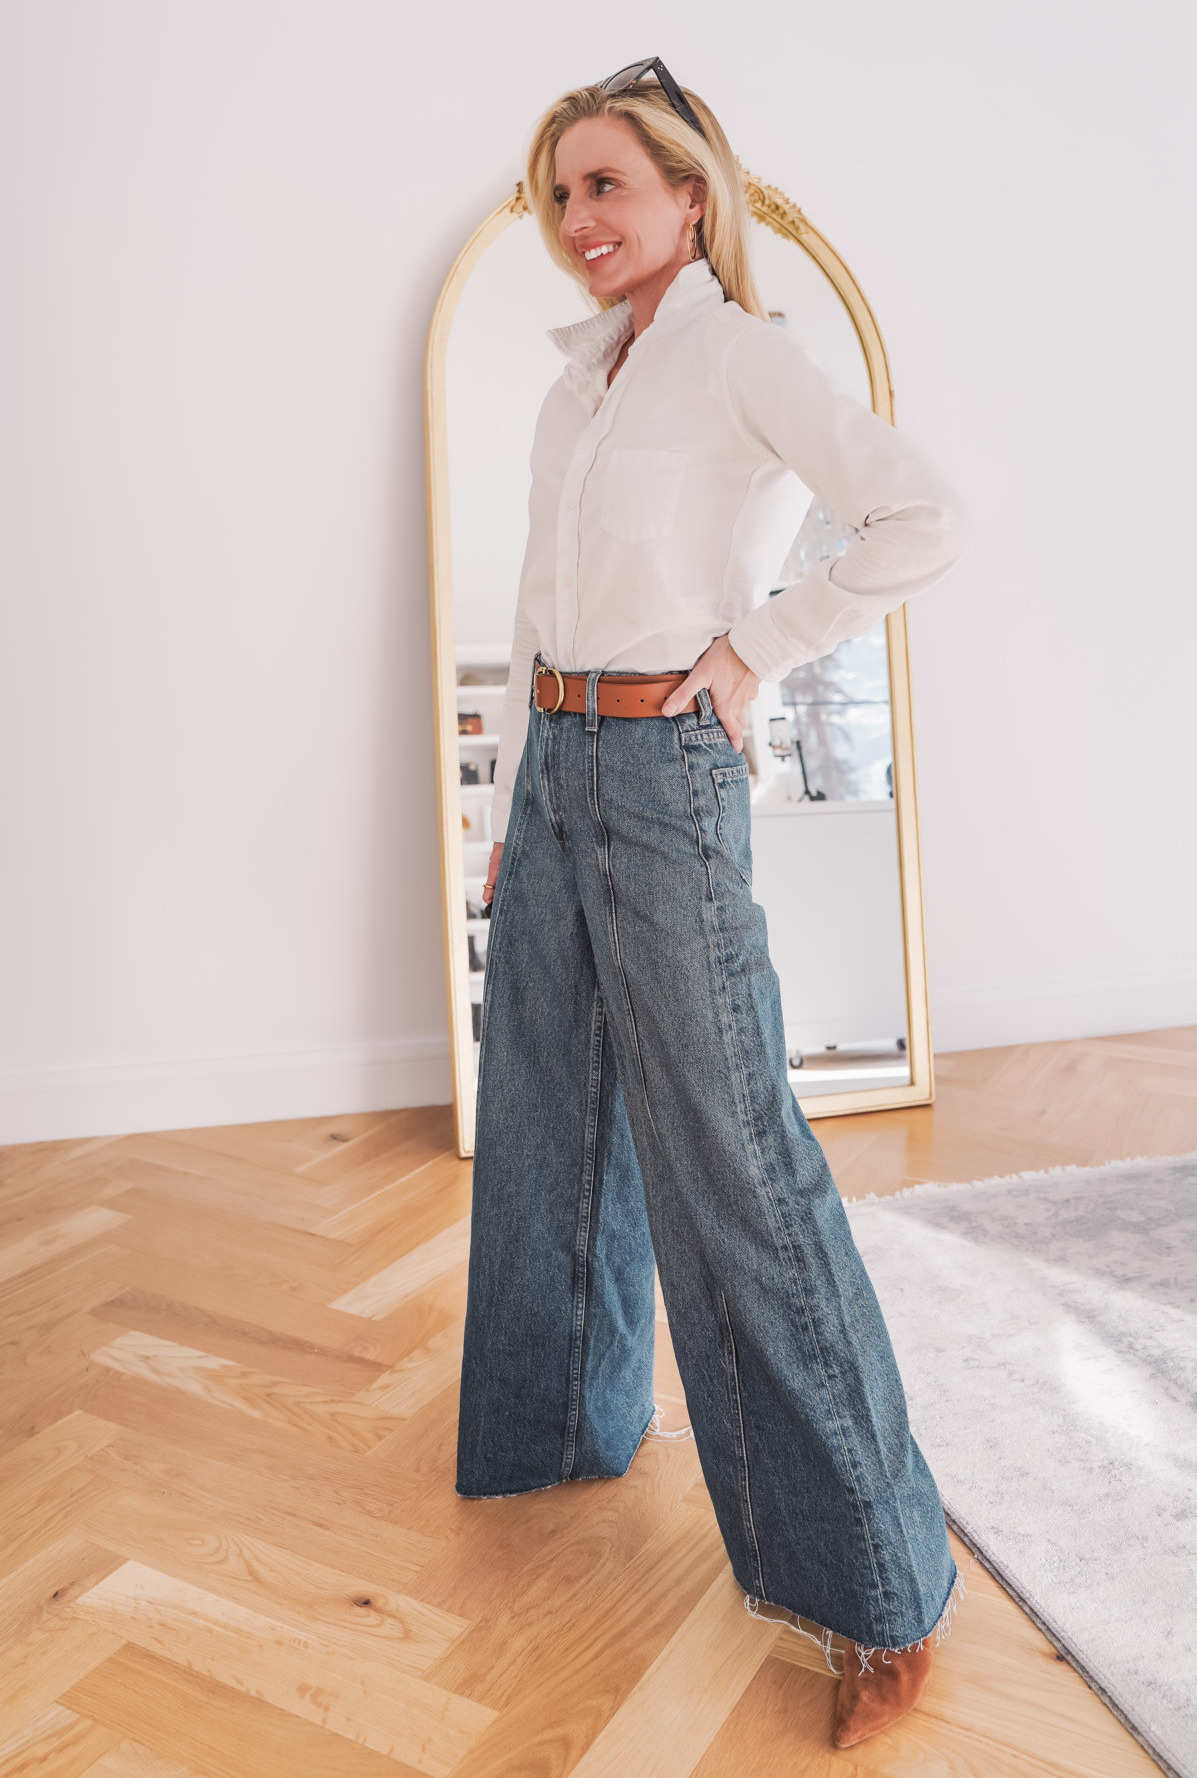 How to Look Taller in Baggy Jeans